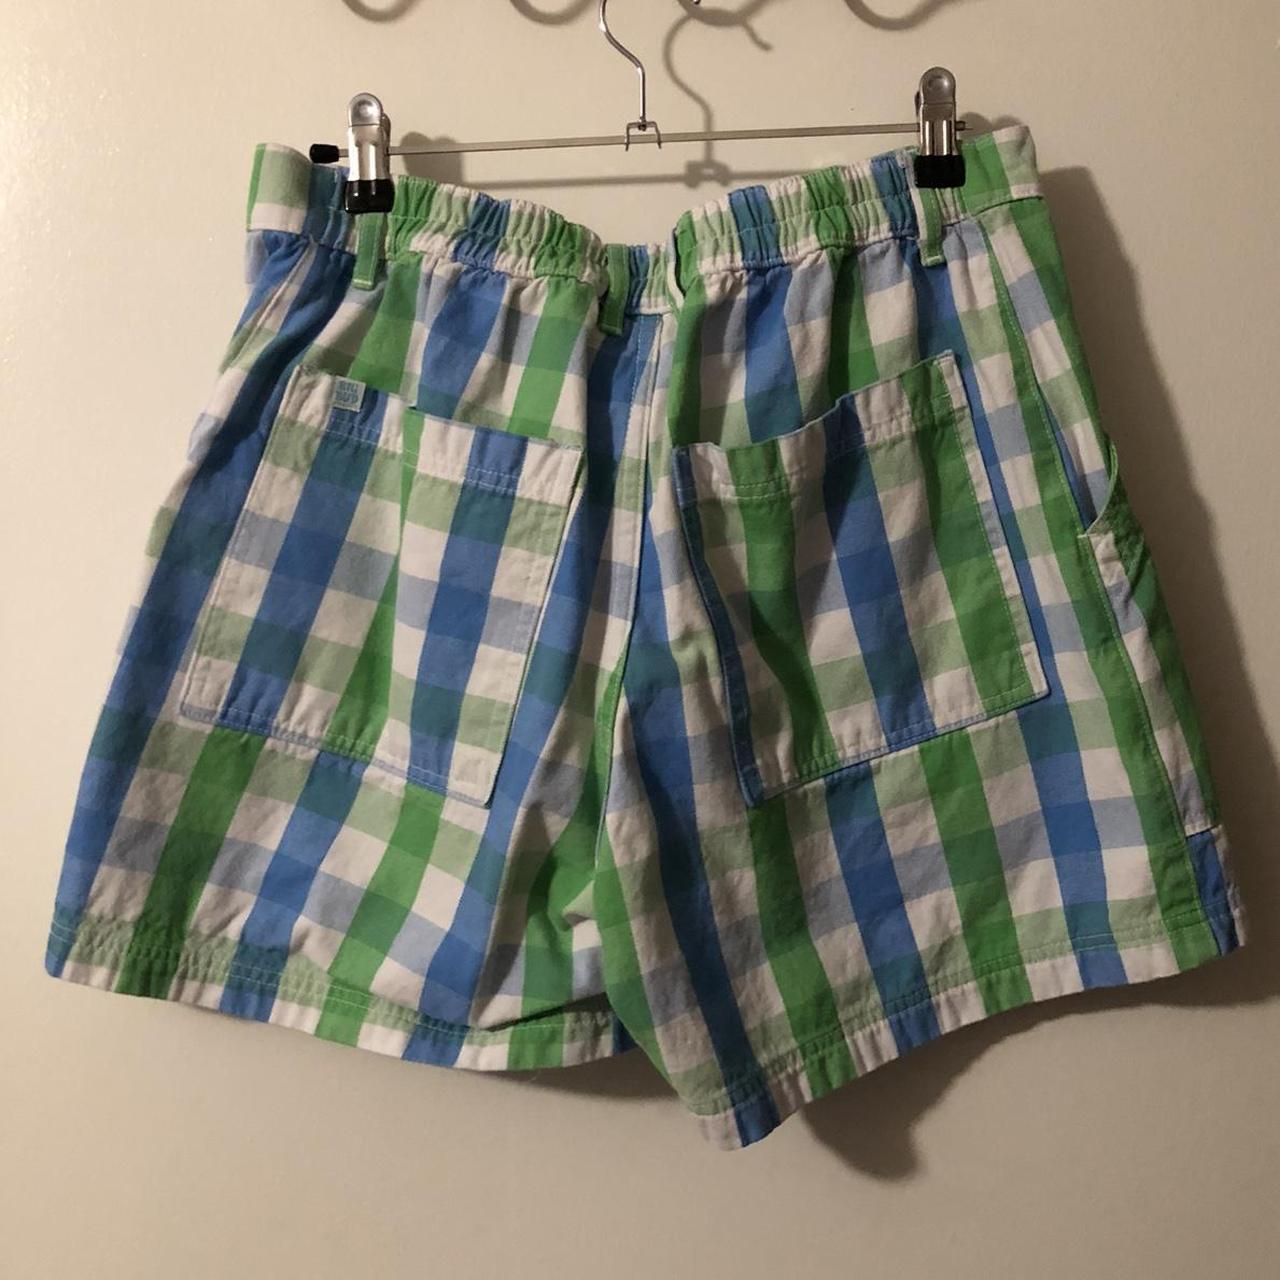 Big Bud Press gingham work shorts in blue and... - Depop